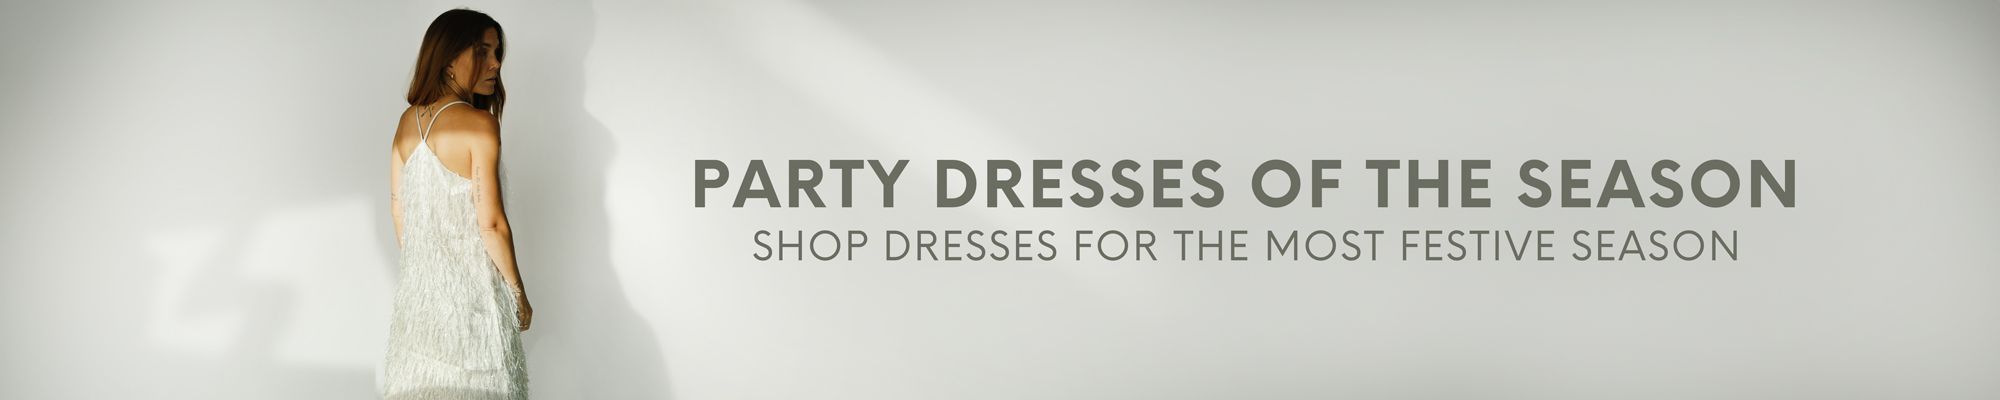 Shop Party Dresses for Christmas and New Years | Byflou.com